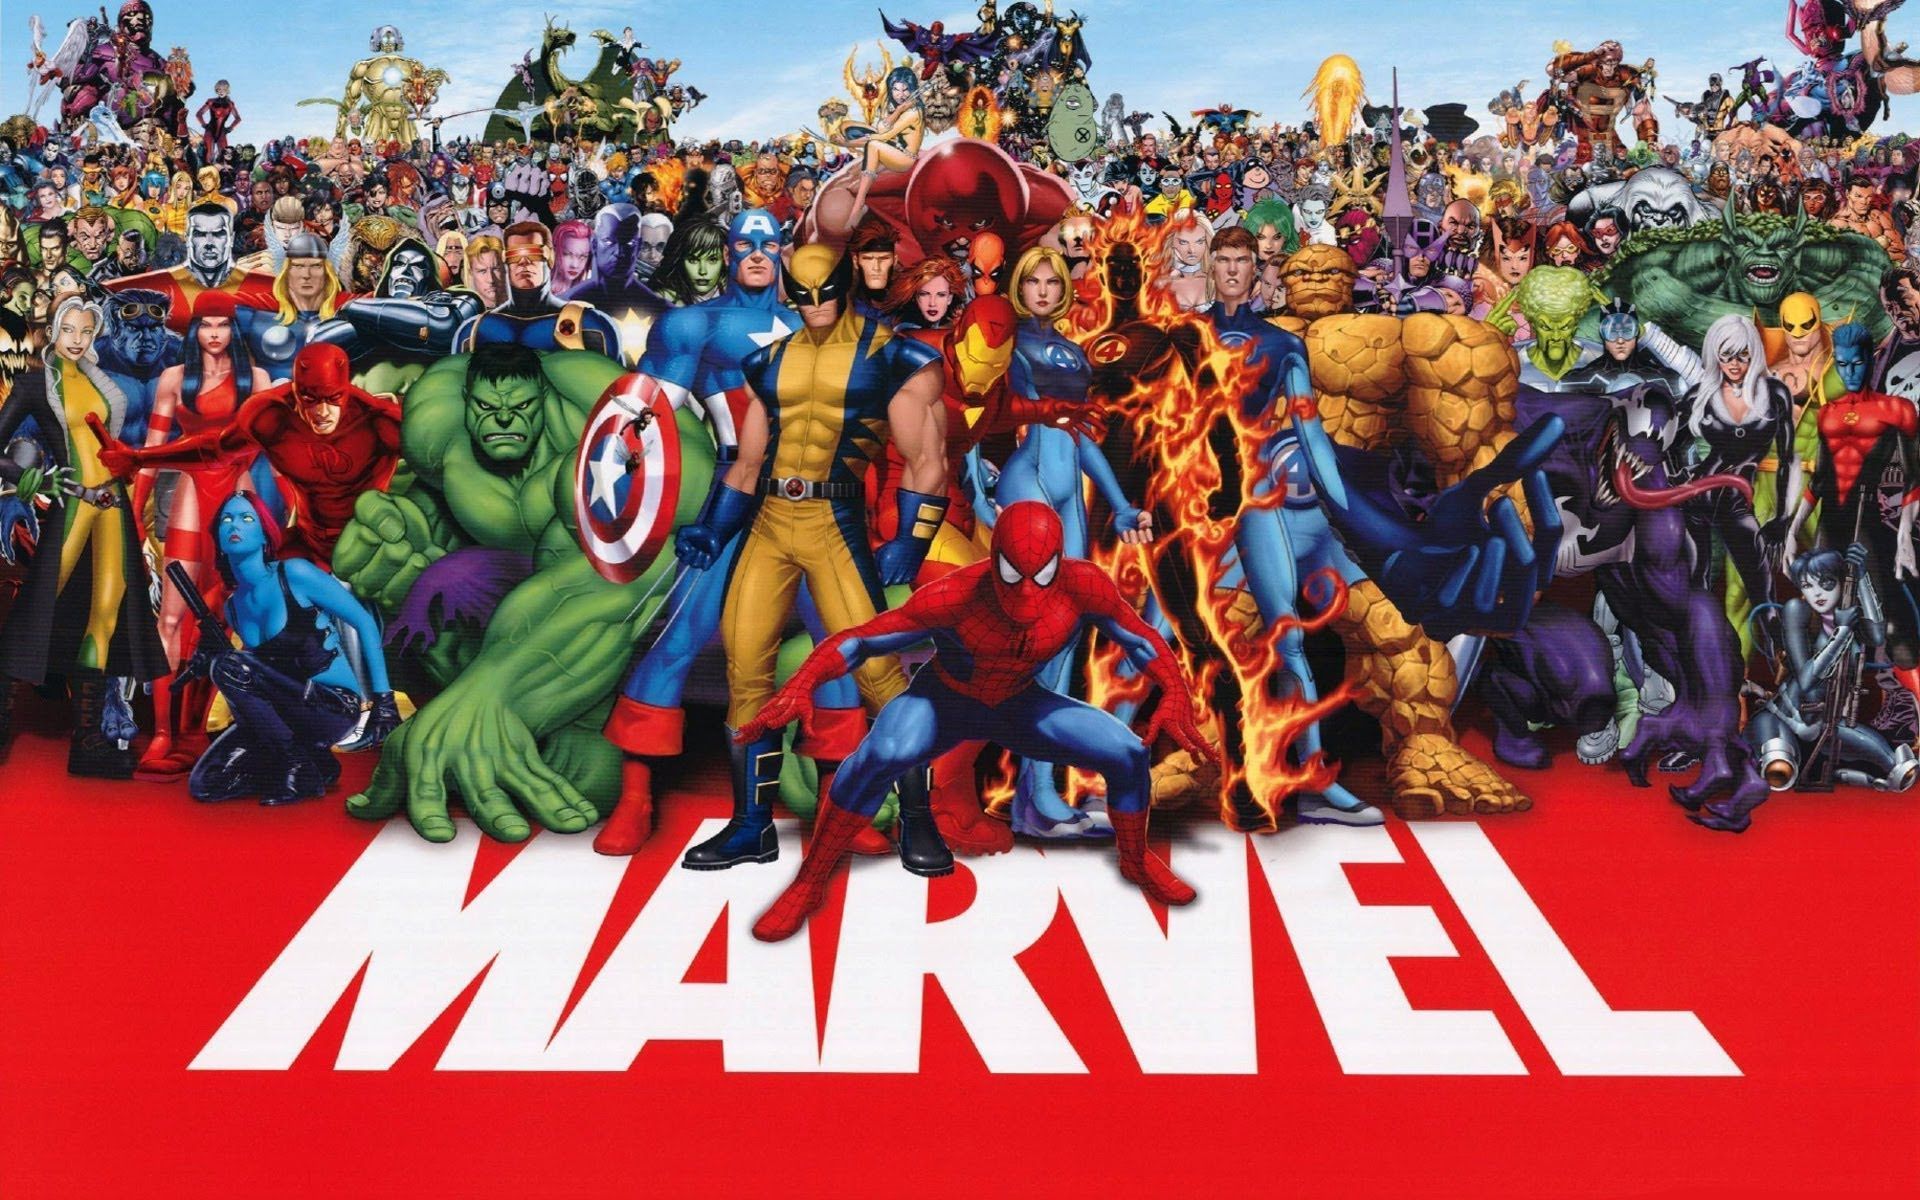 Marvel Heroes Opening intro 1080p HD 720p GamersGames - YouTube